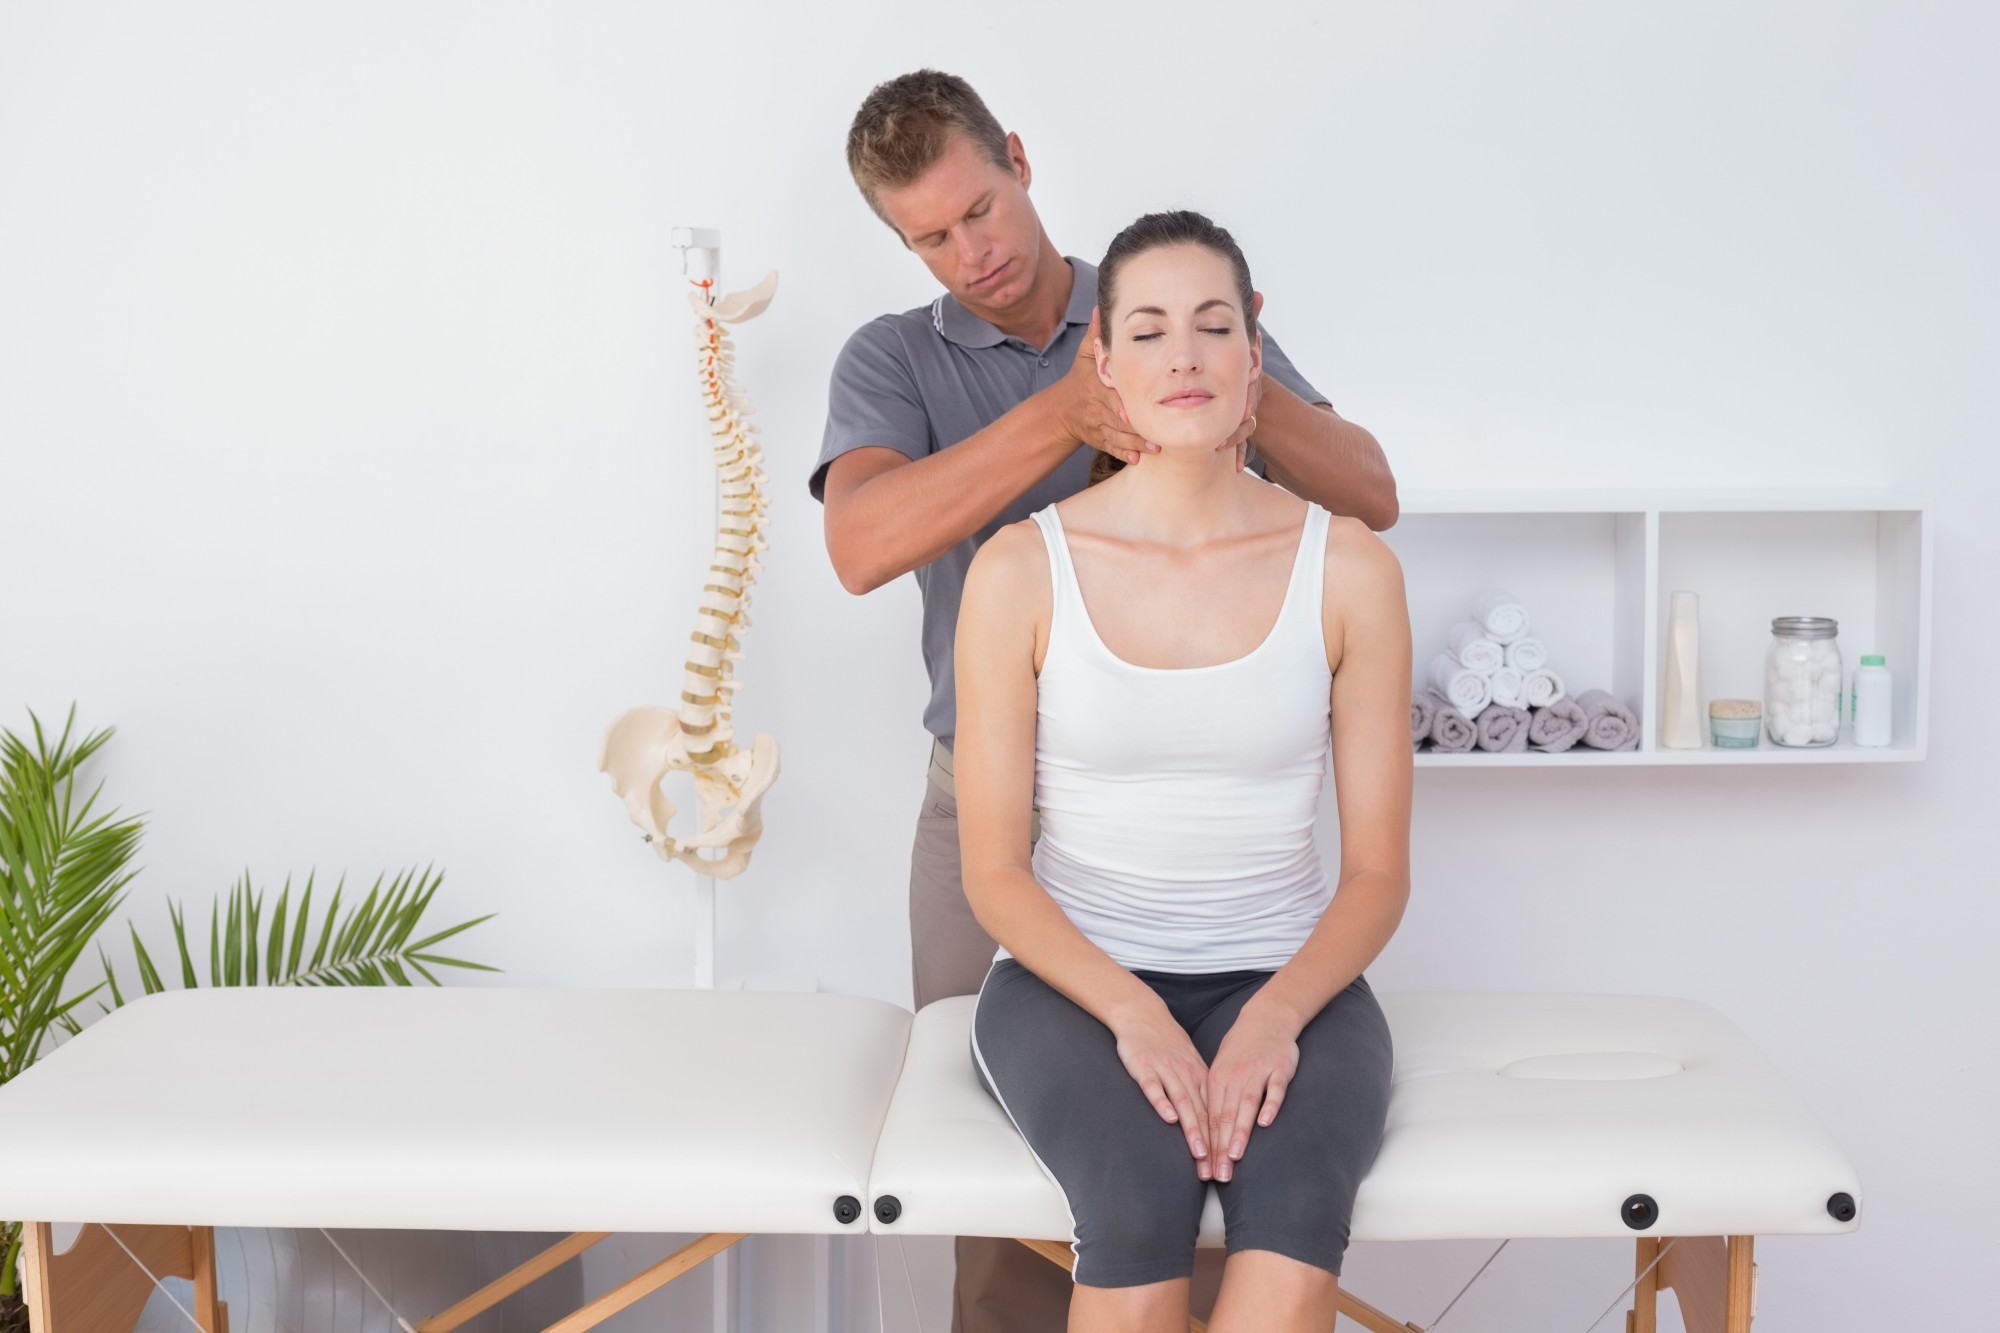 Are you wondering whether or not to visit a chiropractor? Click here to discover 4 incredible benefits of chiropractic care.